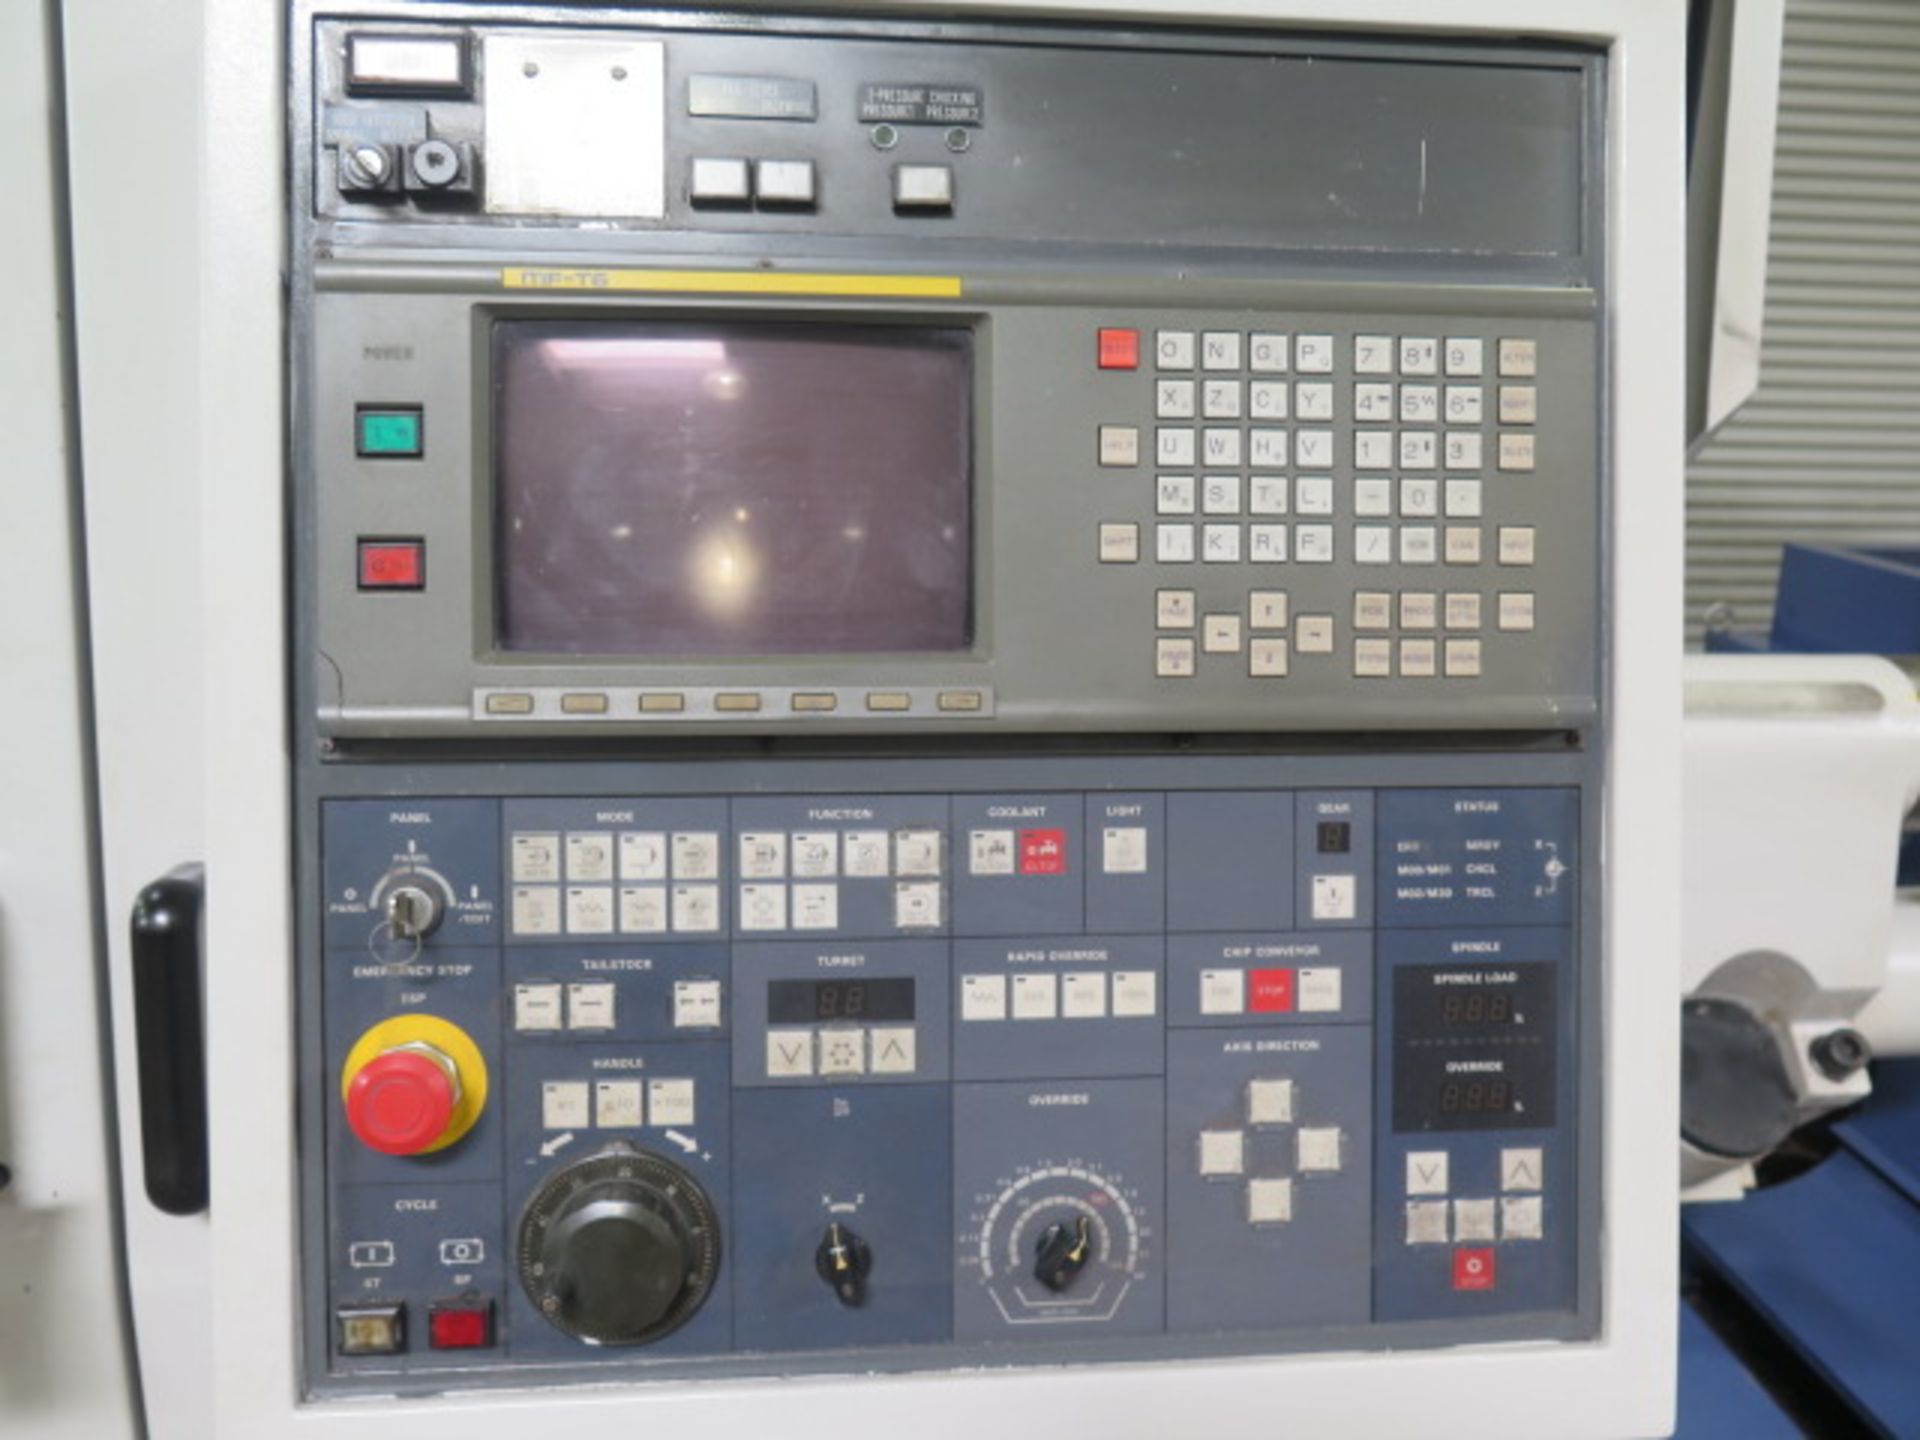 Mori Seiki SL-65A CNC Turning Center s/n 1146 w/ Fanuc Series MF-T6 Controls, SOLD AS IS - Image 11 of 16